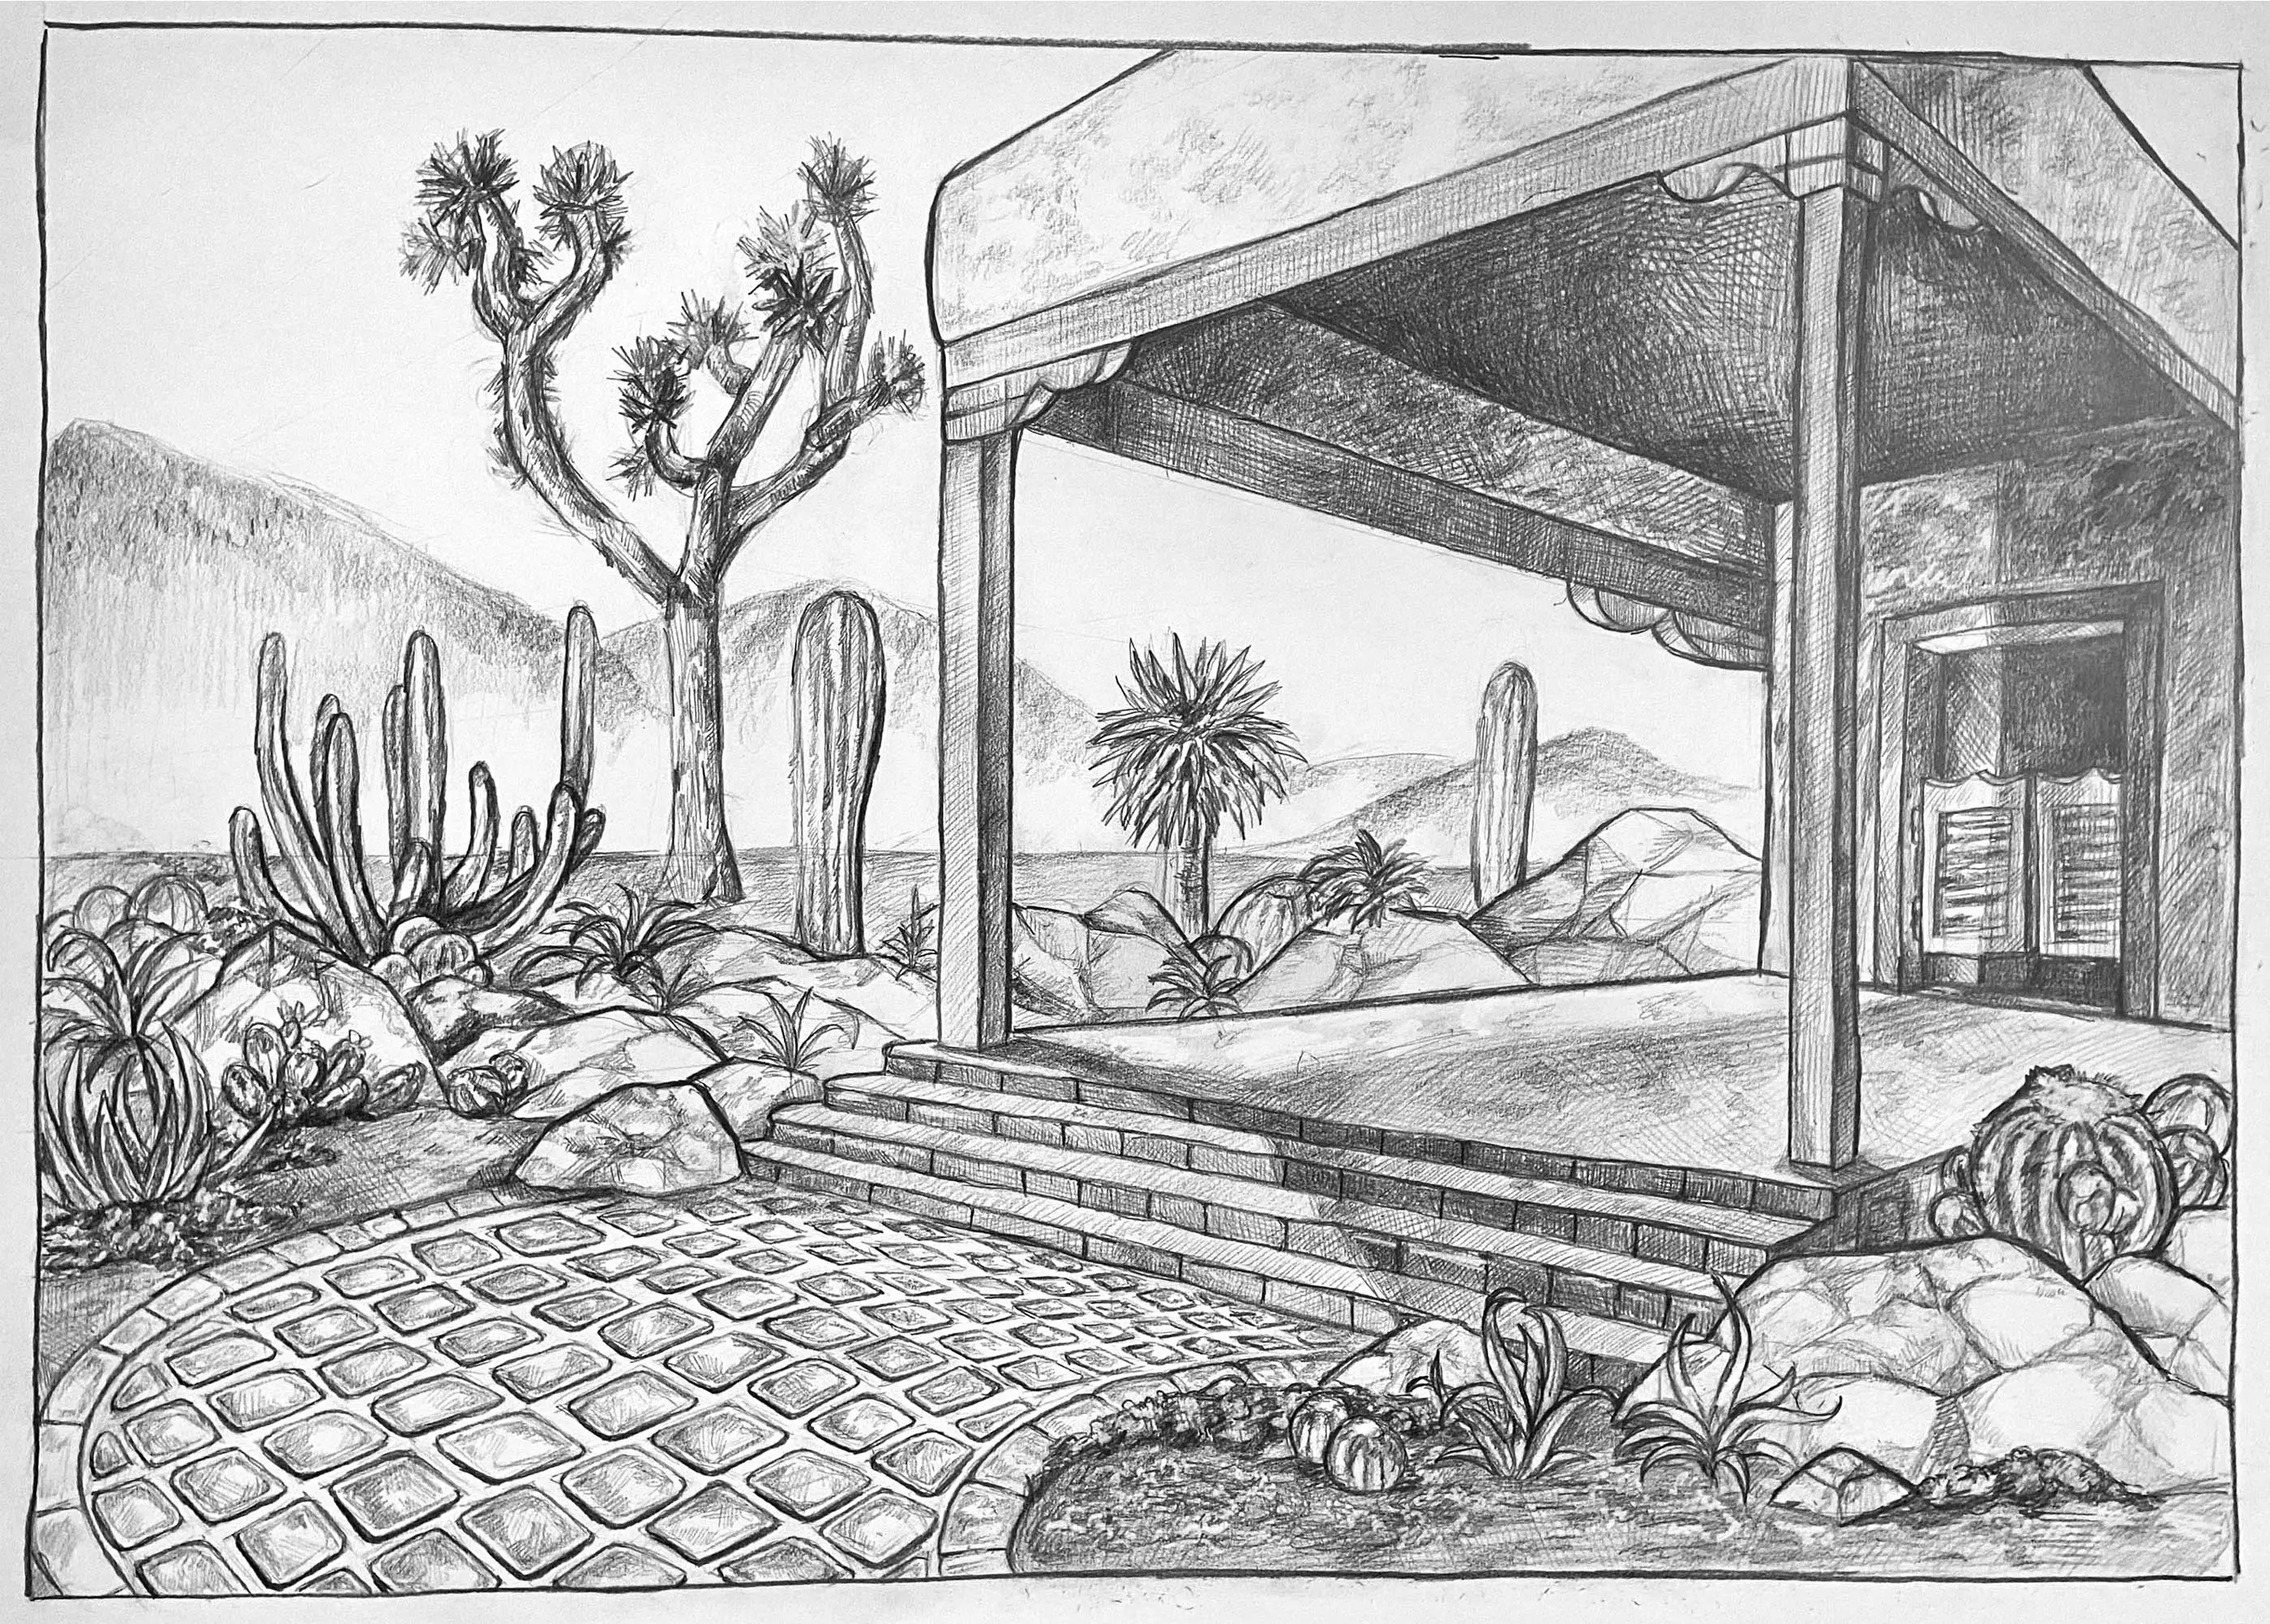 A drawing of the entrance to a building in the desert.